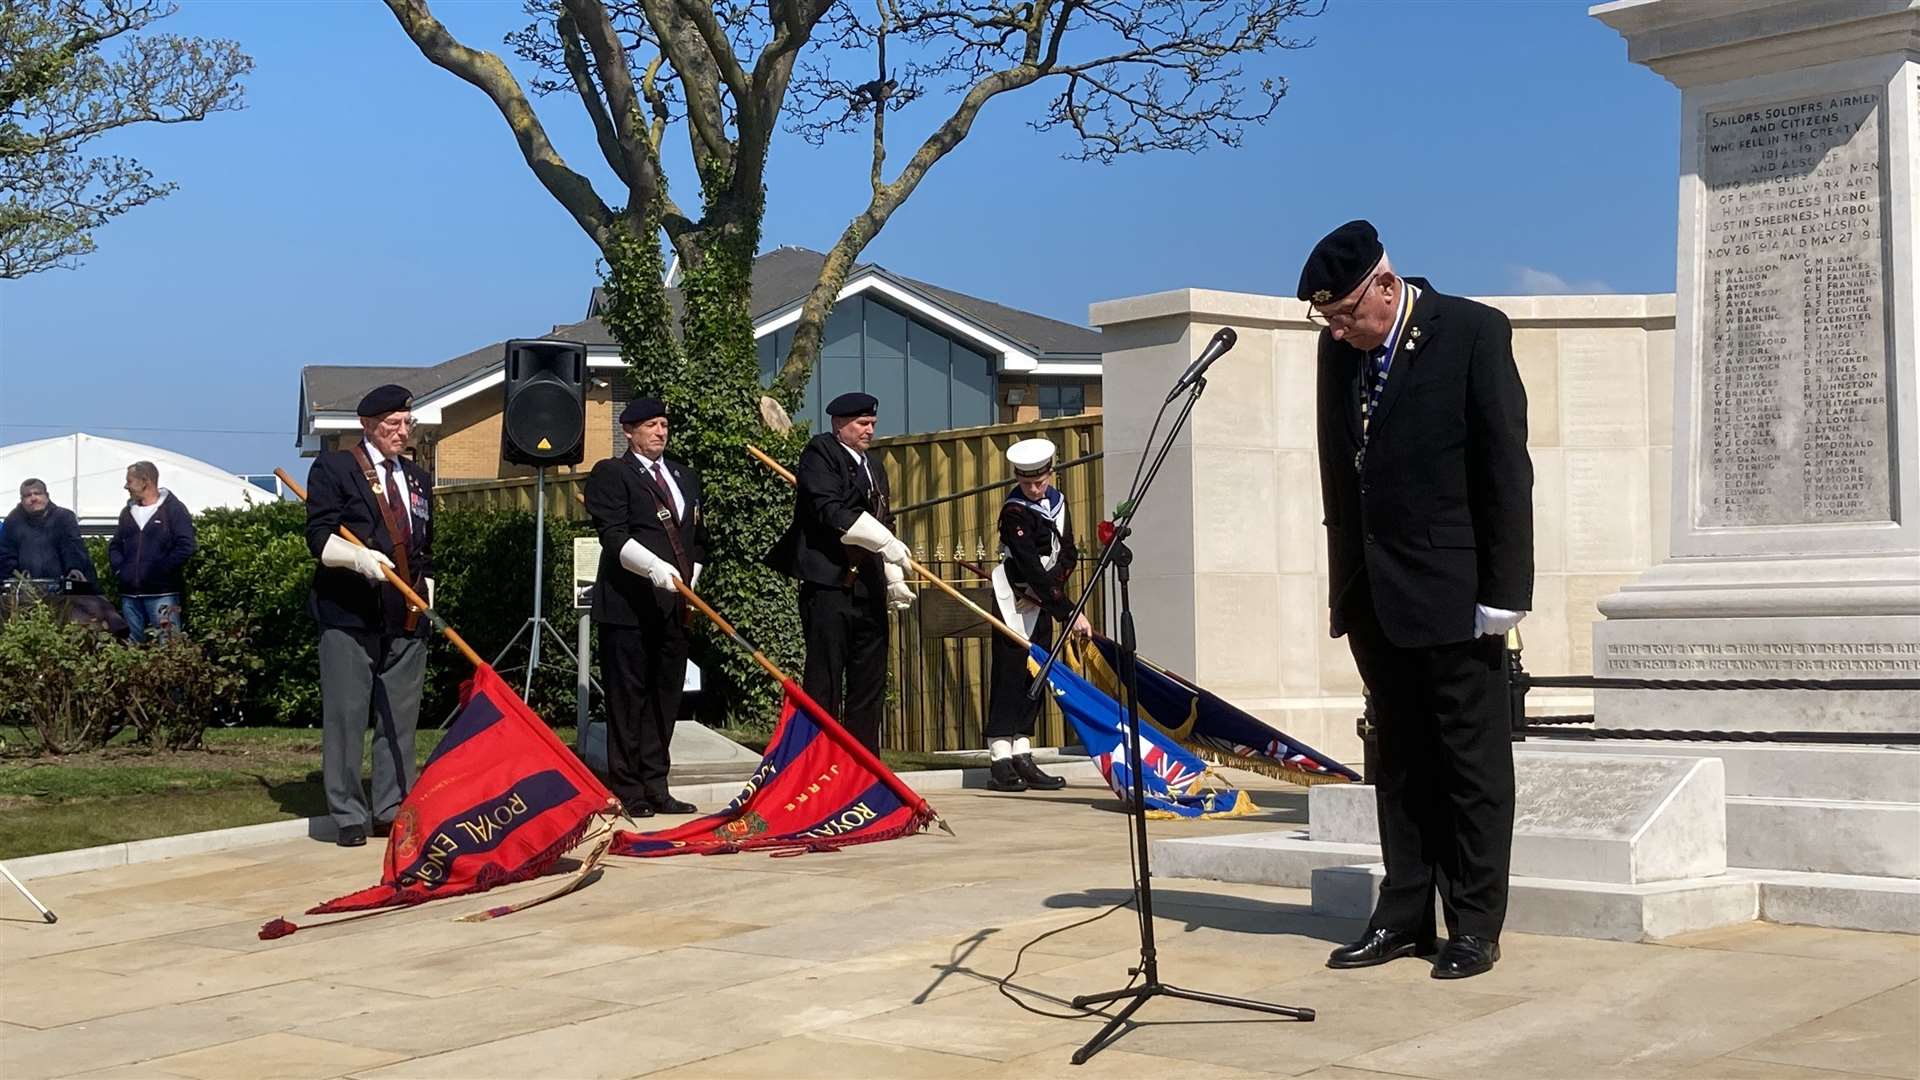 Colours lowered for a two minutes silence at the dedication of the new memorial wall in Sheerness